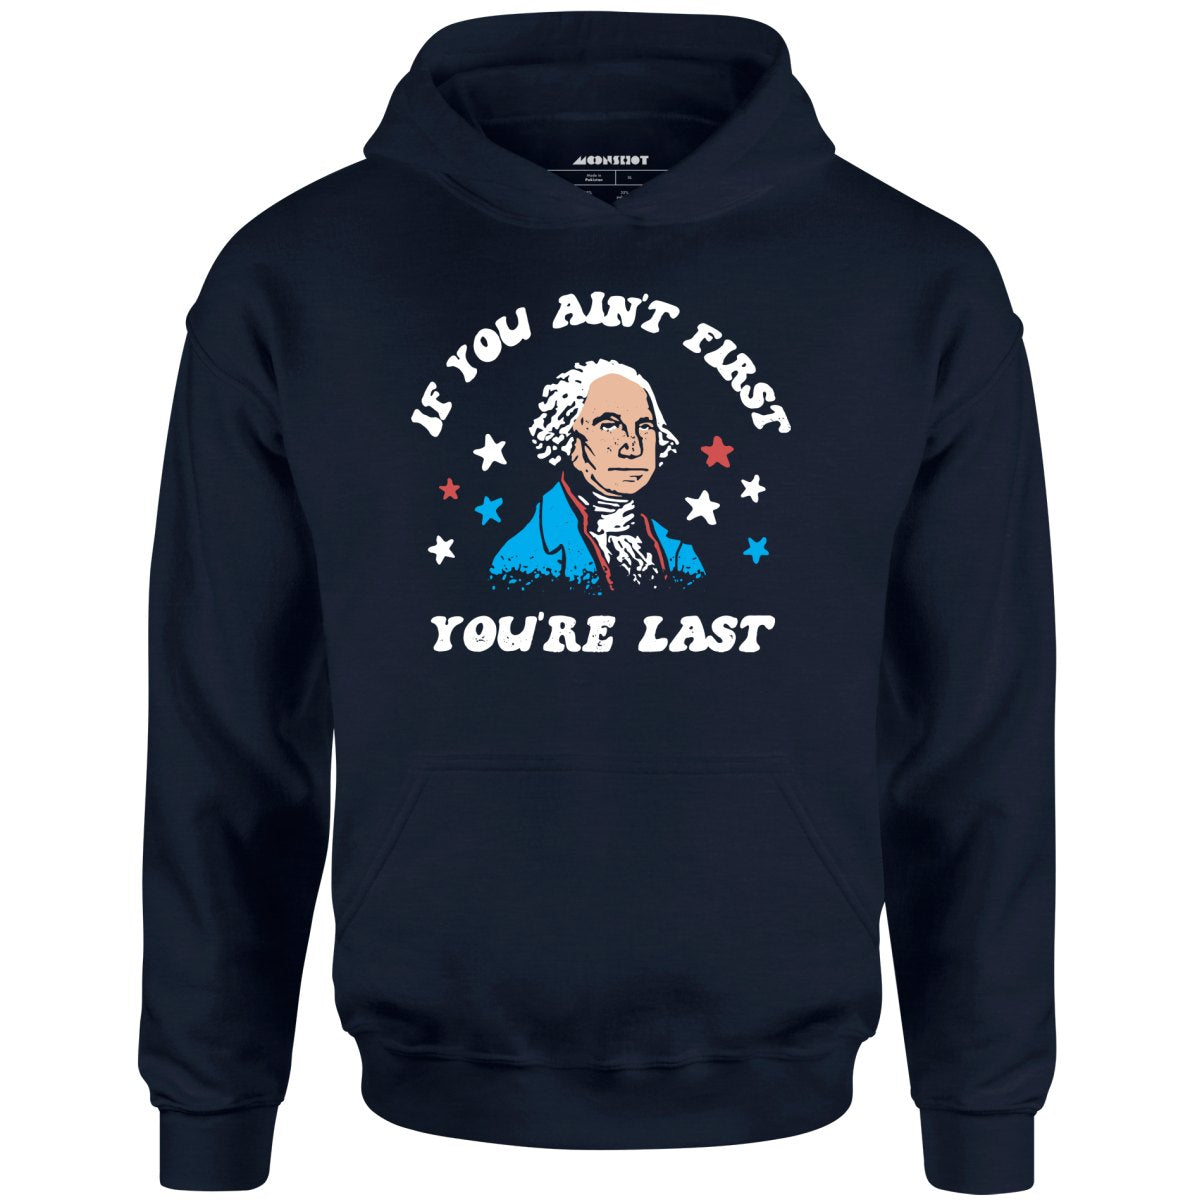 If You Ain't First You're Last - Unisex Hoodie